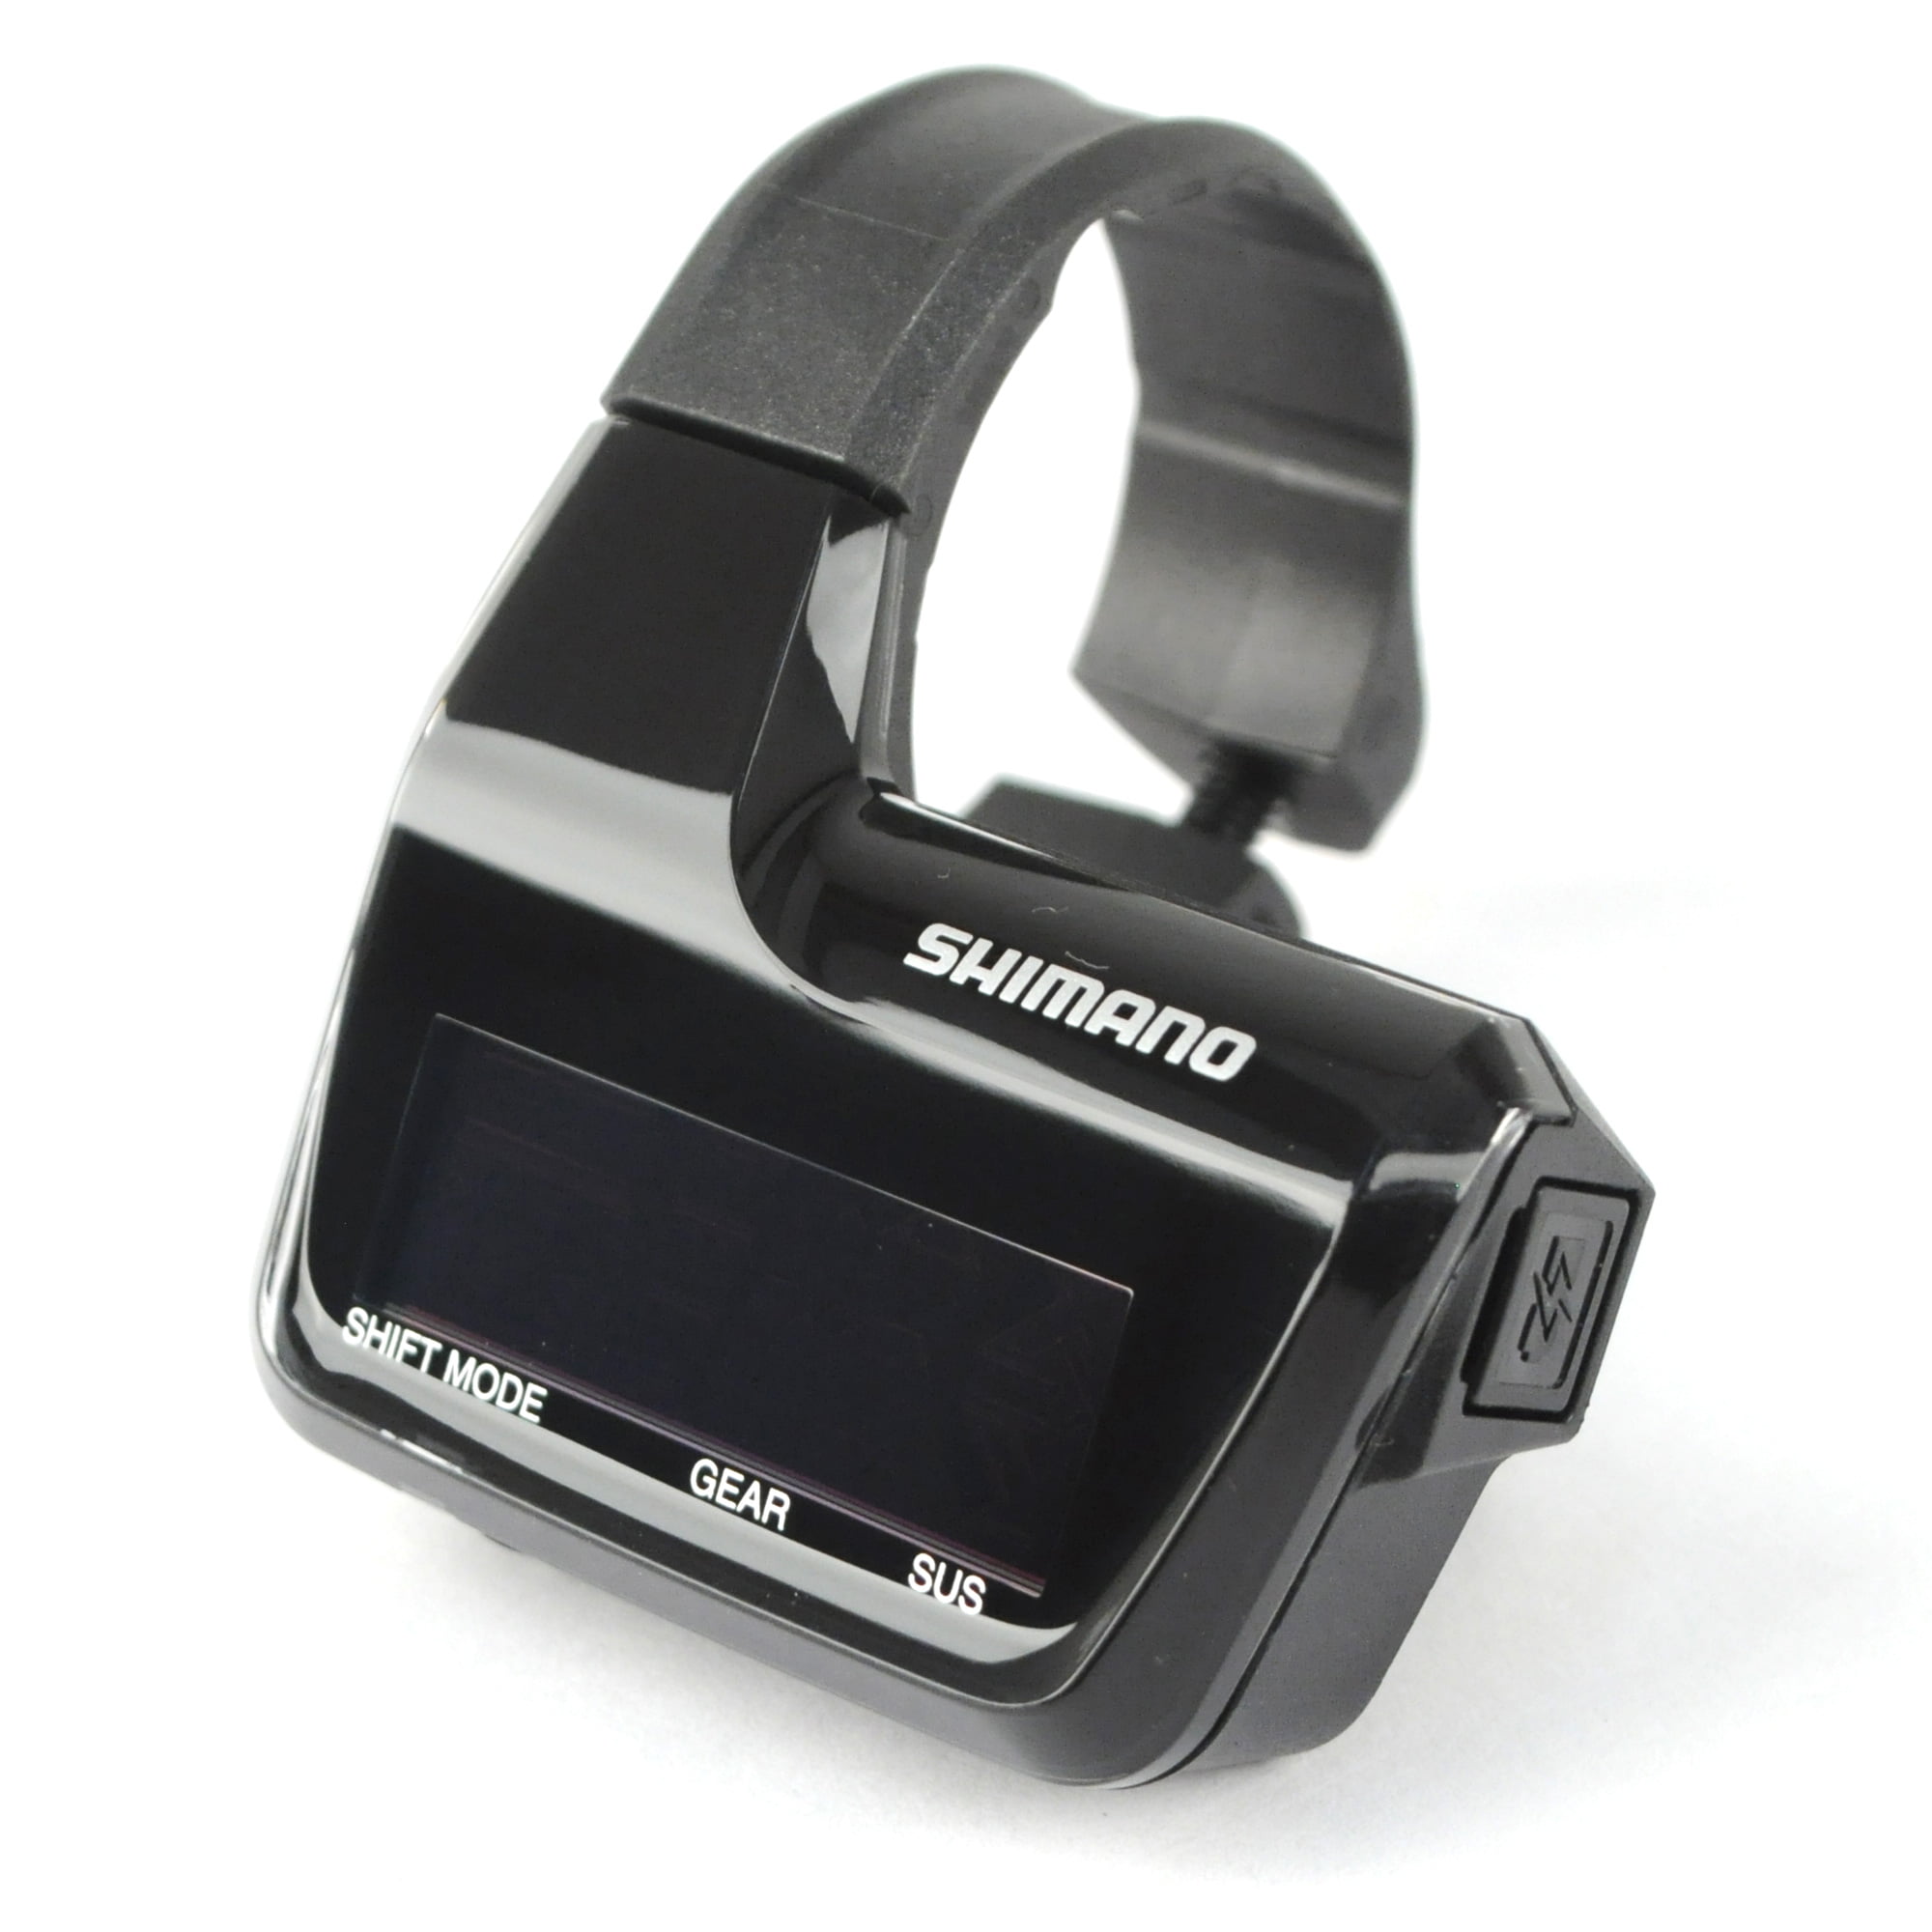 Shimano Deore XT Di2 MT800 Bluetooth ANT+ Display D-Fly Wireless